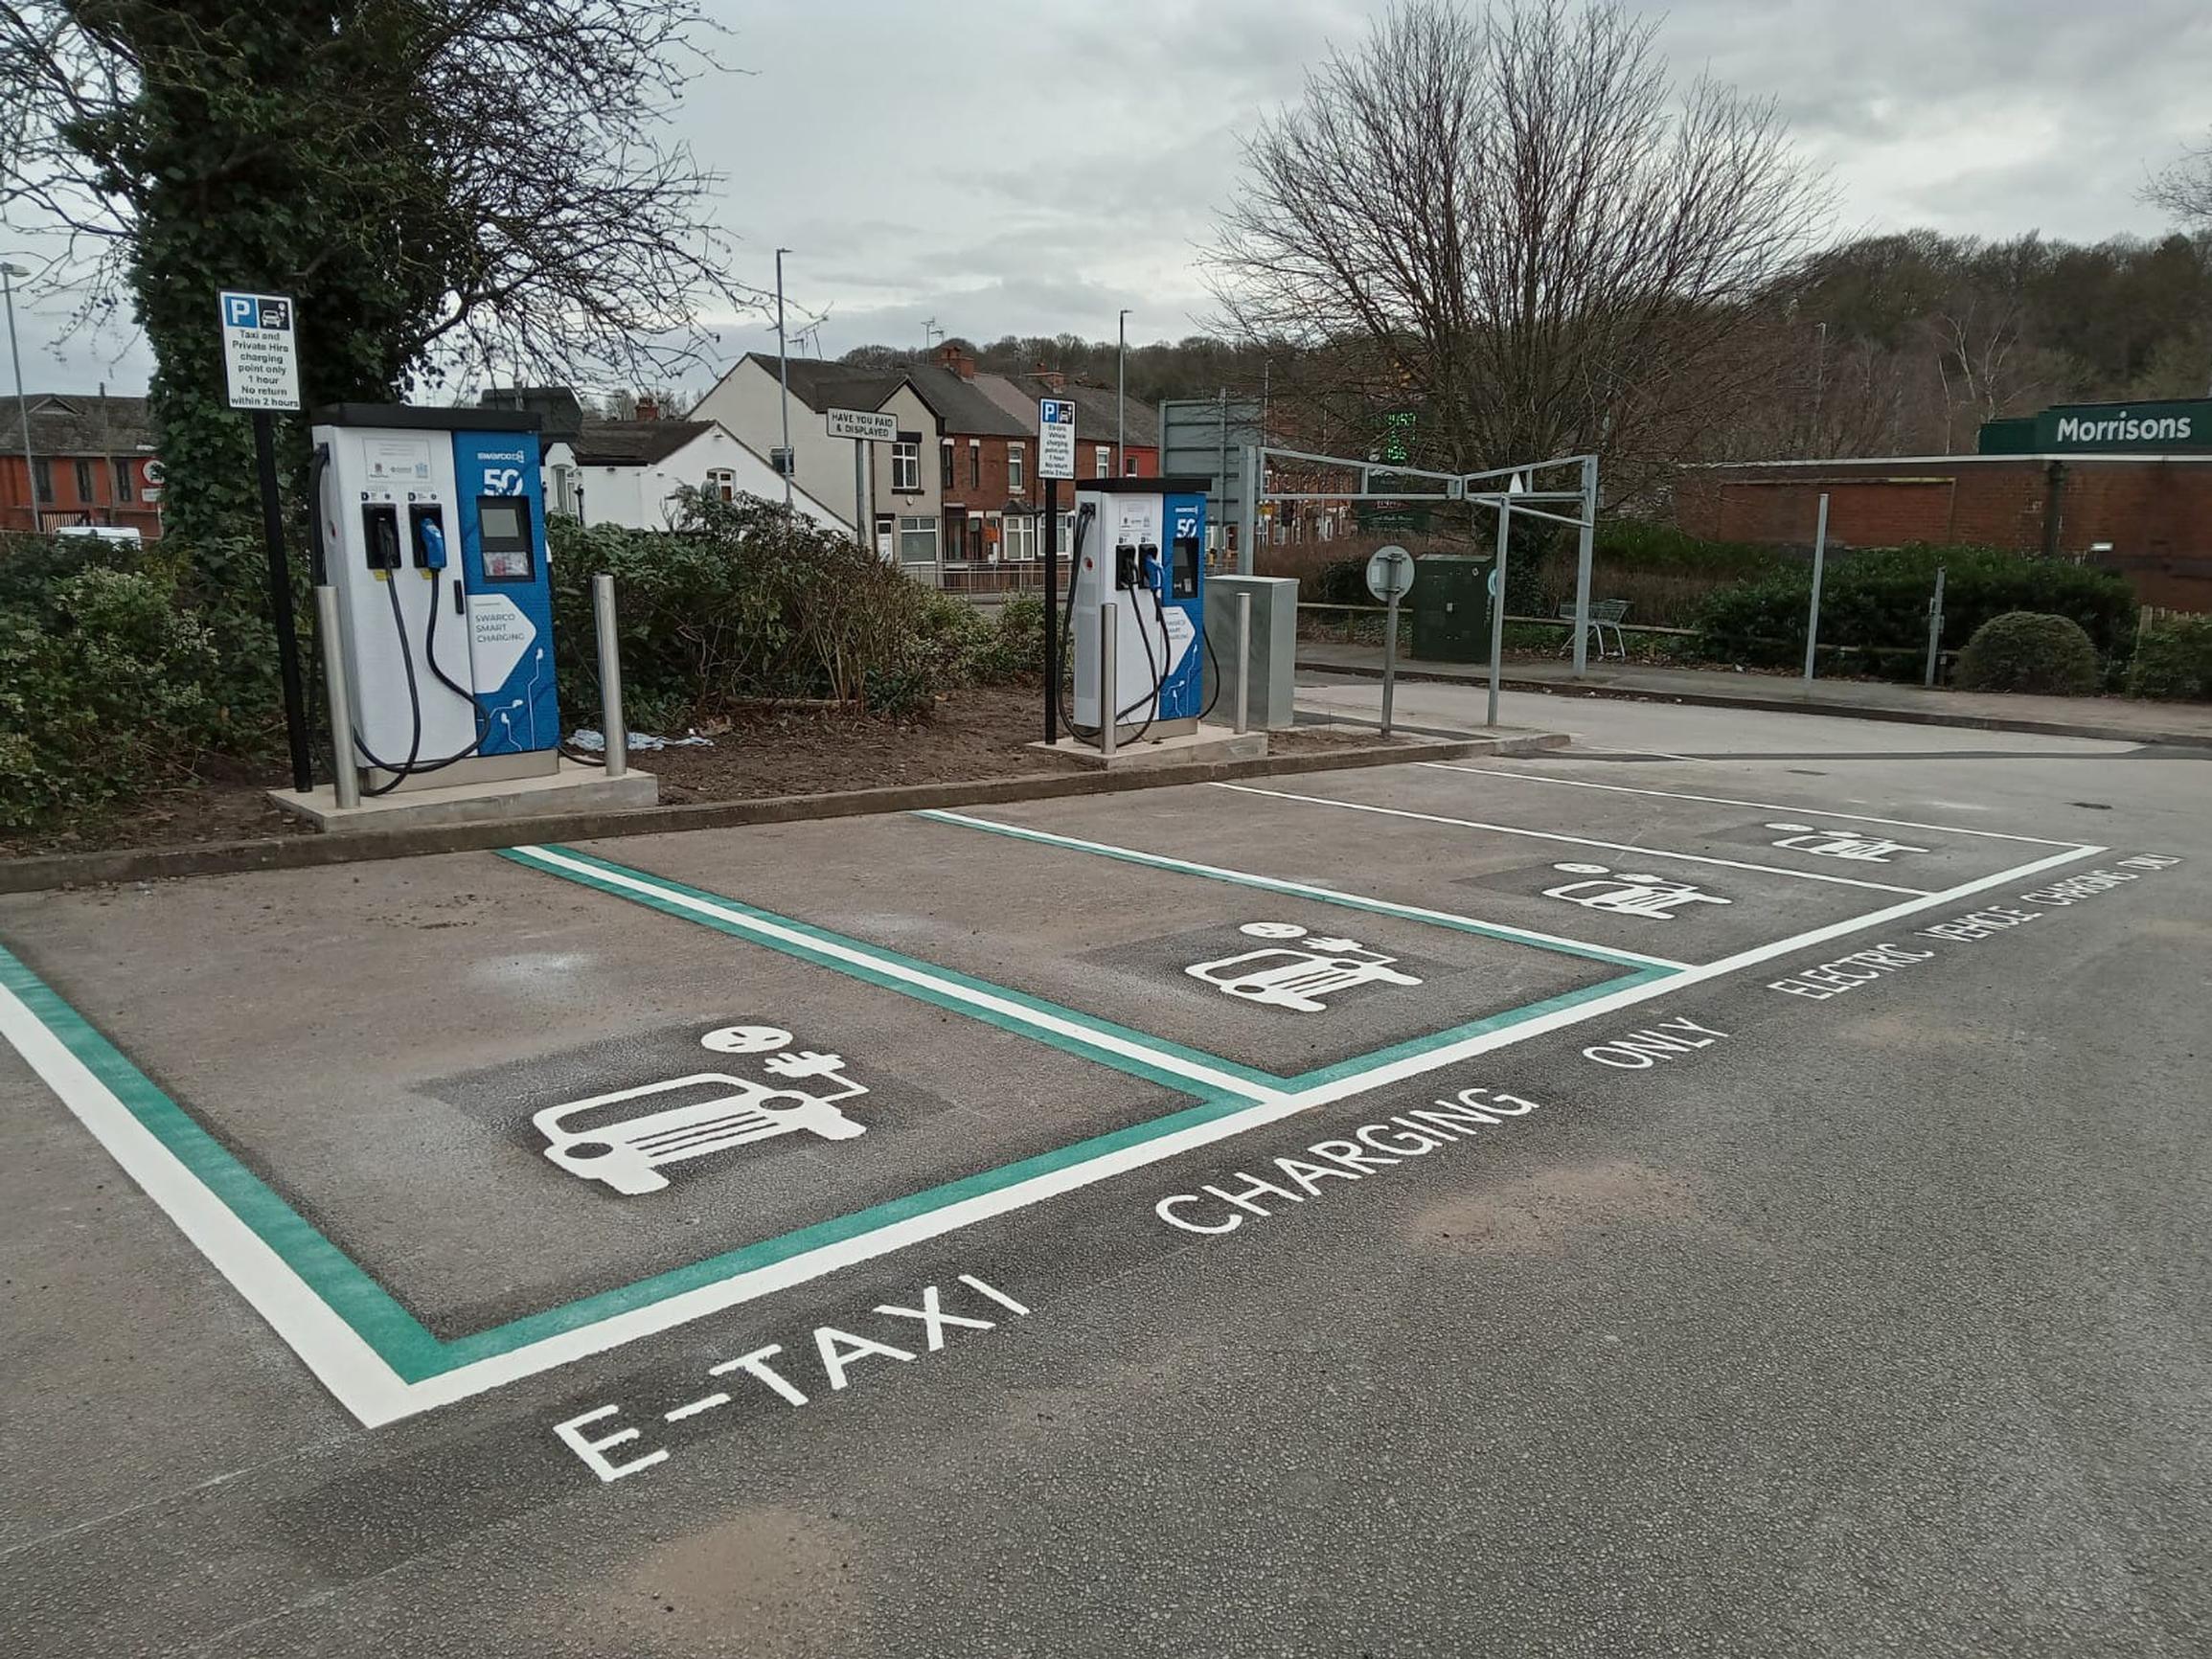 An e-taxi charging station